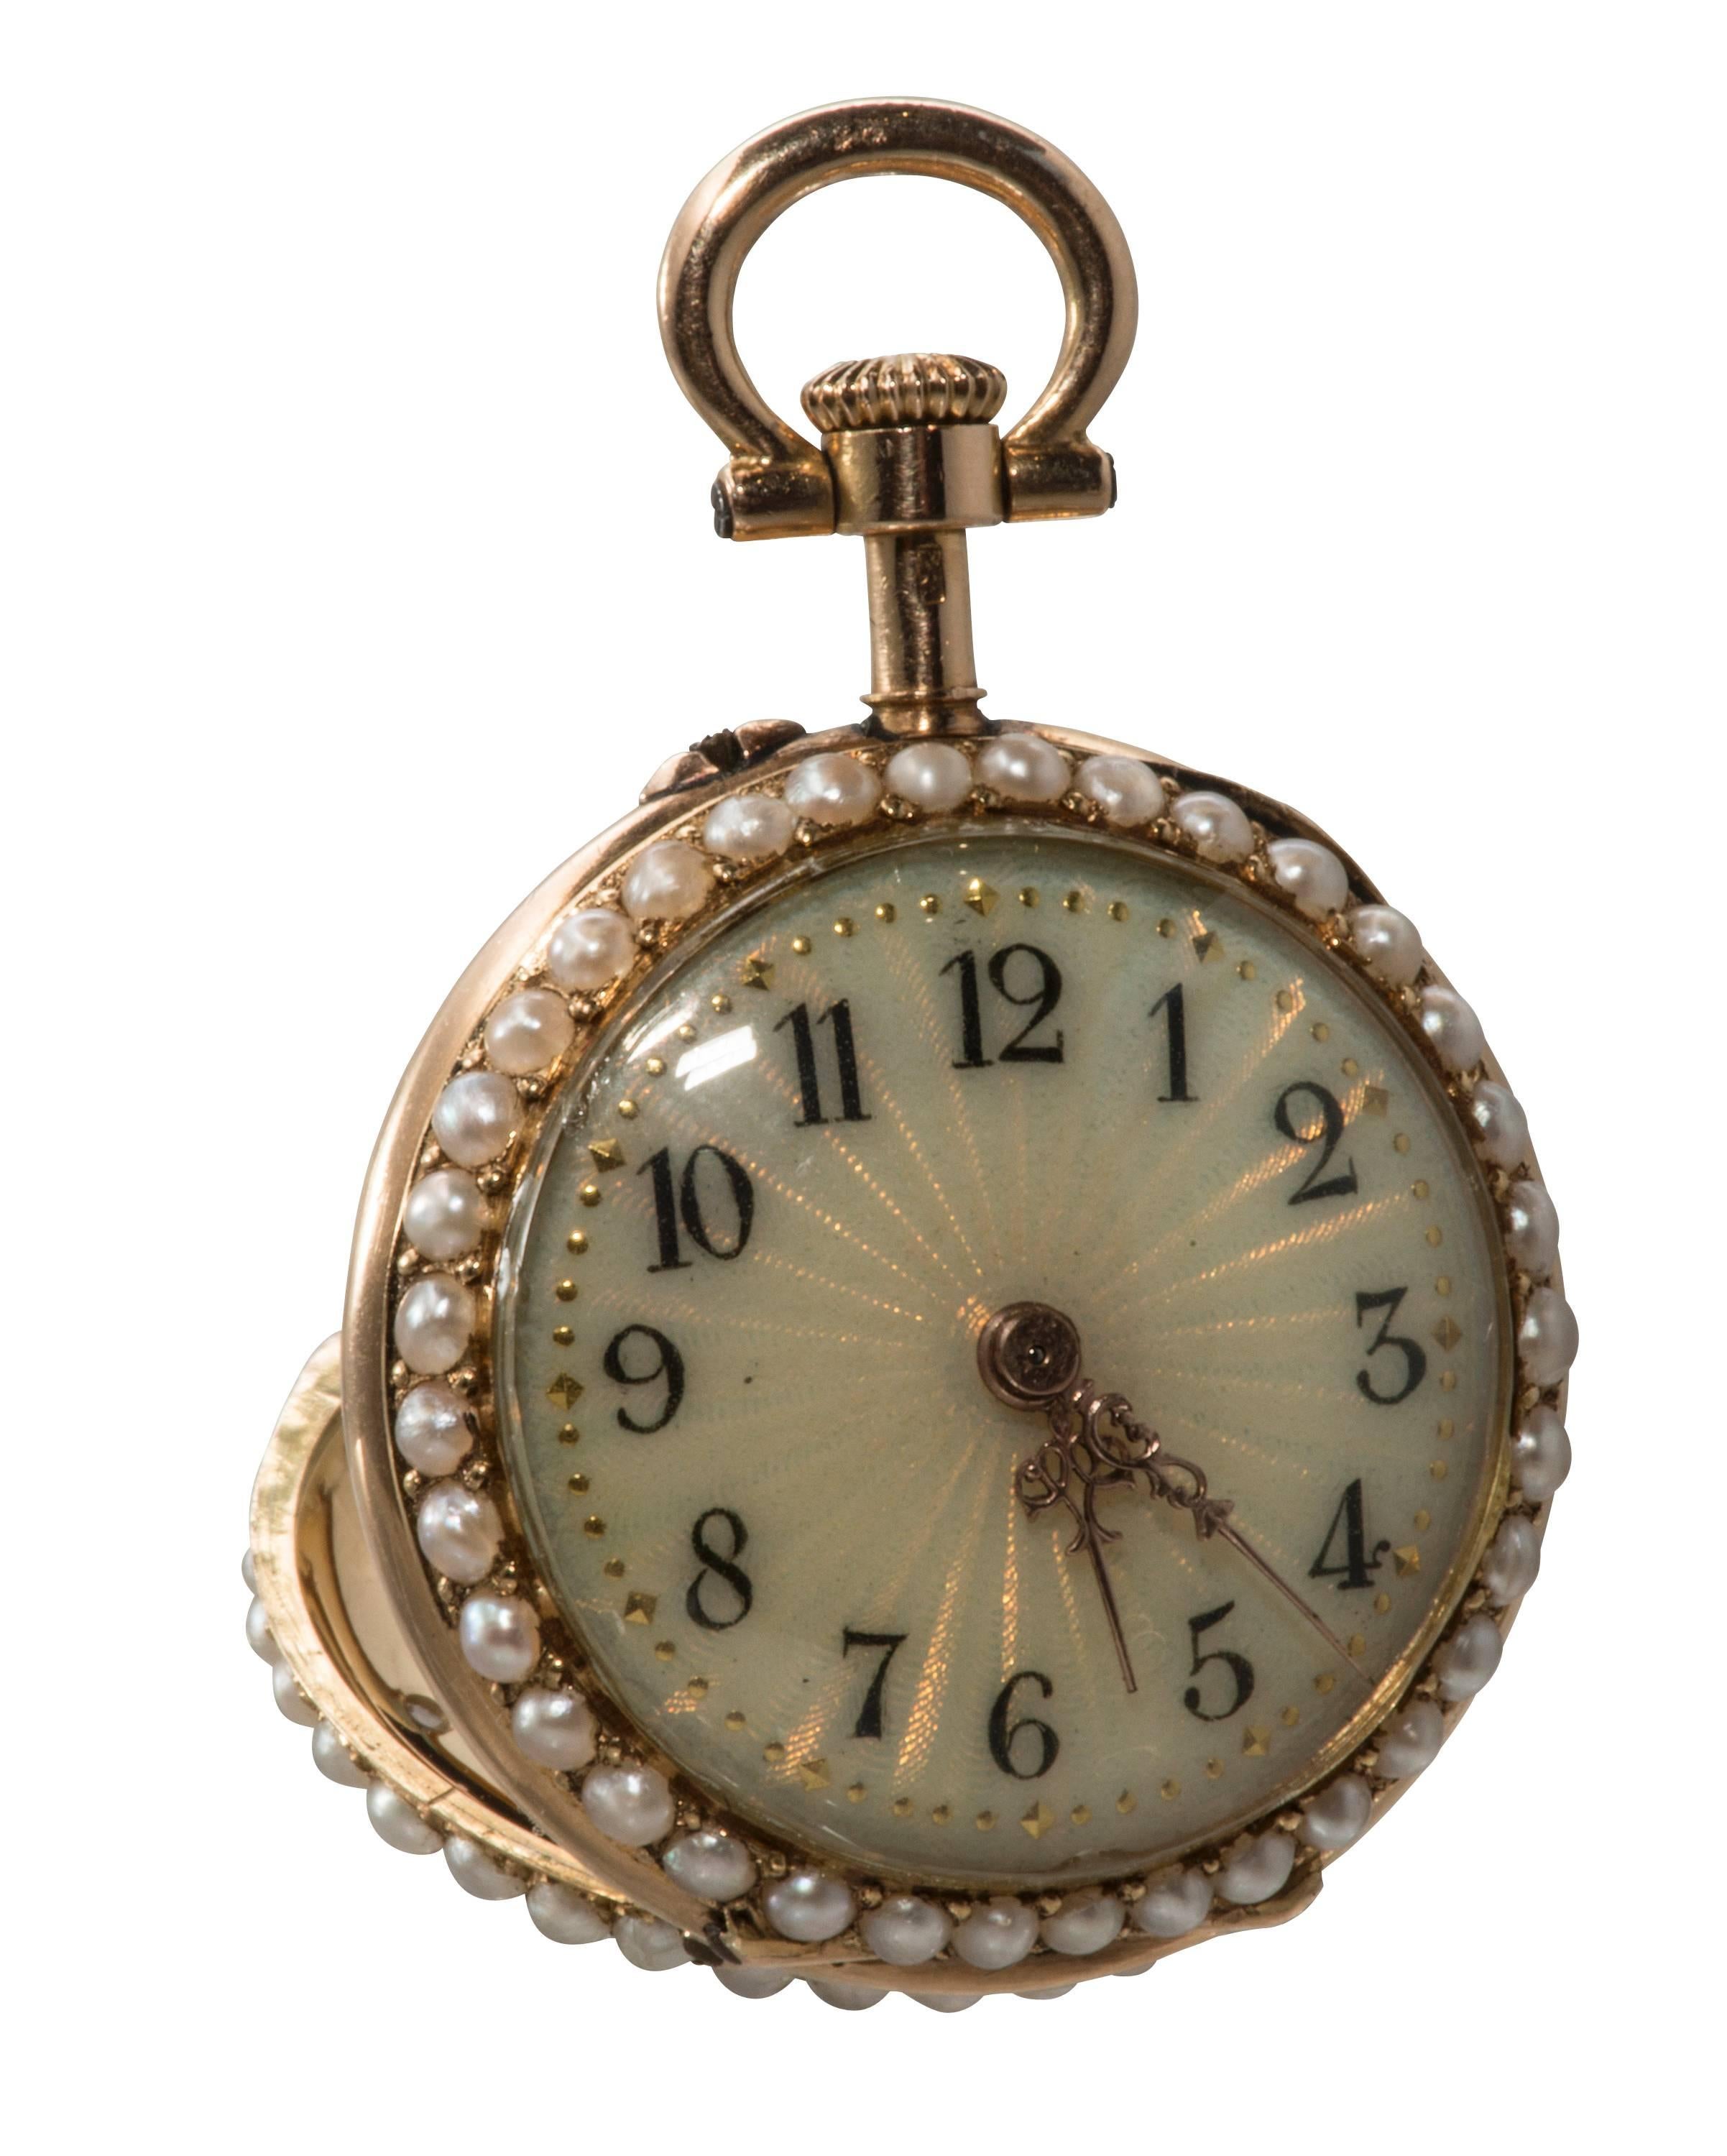 This is an exquisite Russian pendant watch made of enamel and natural pearls.